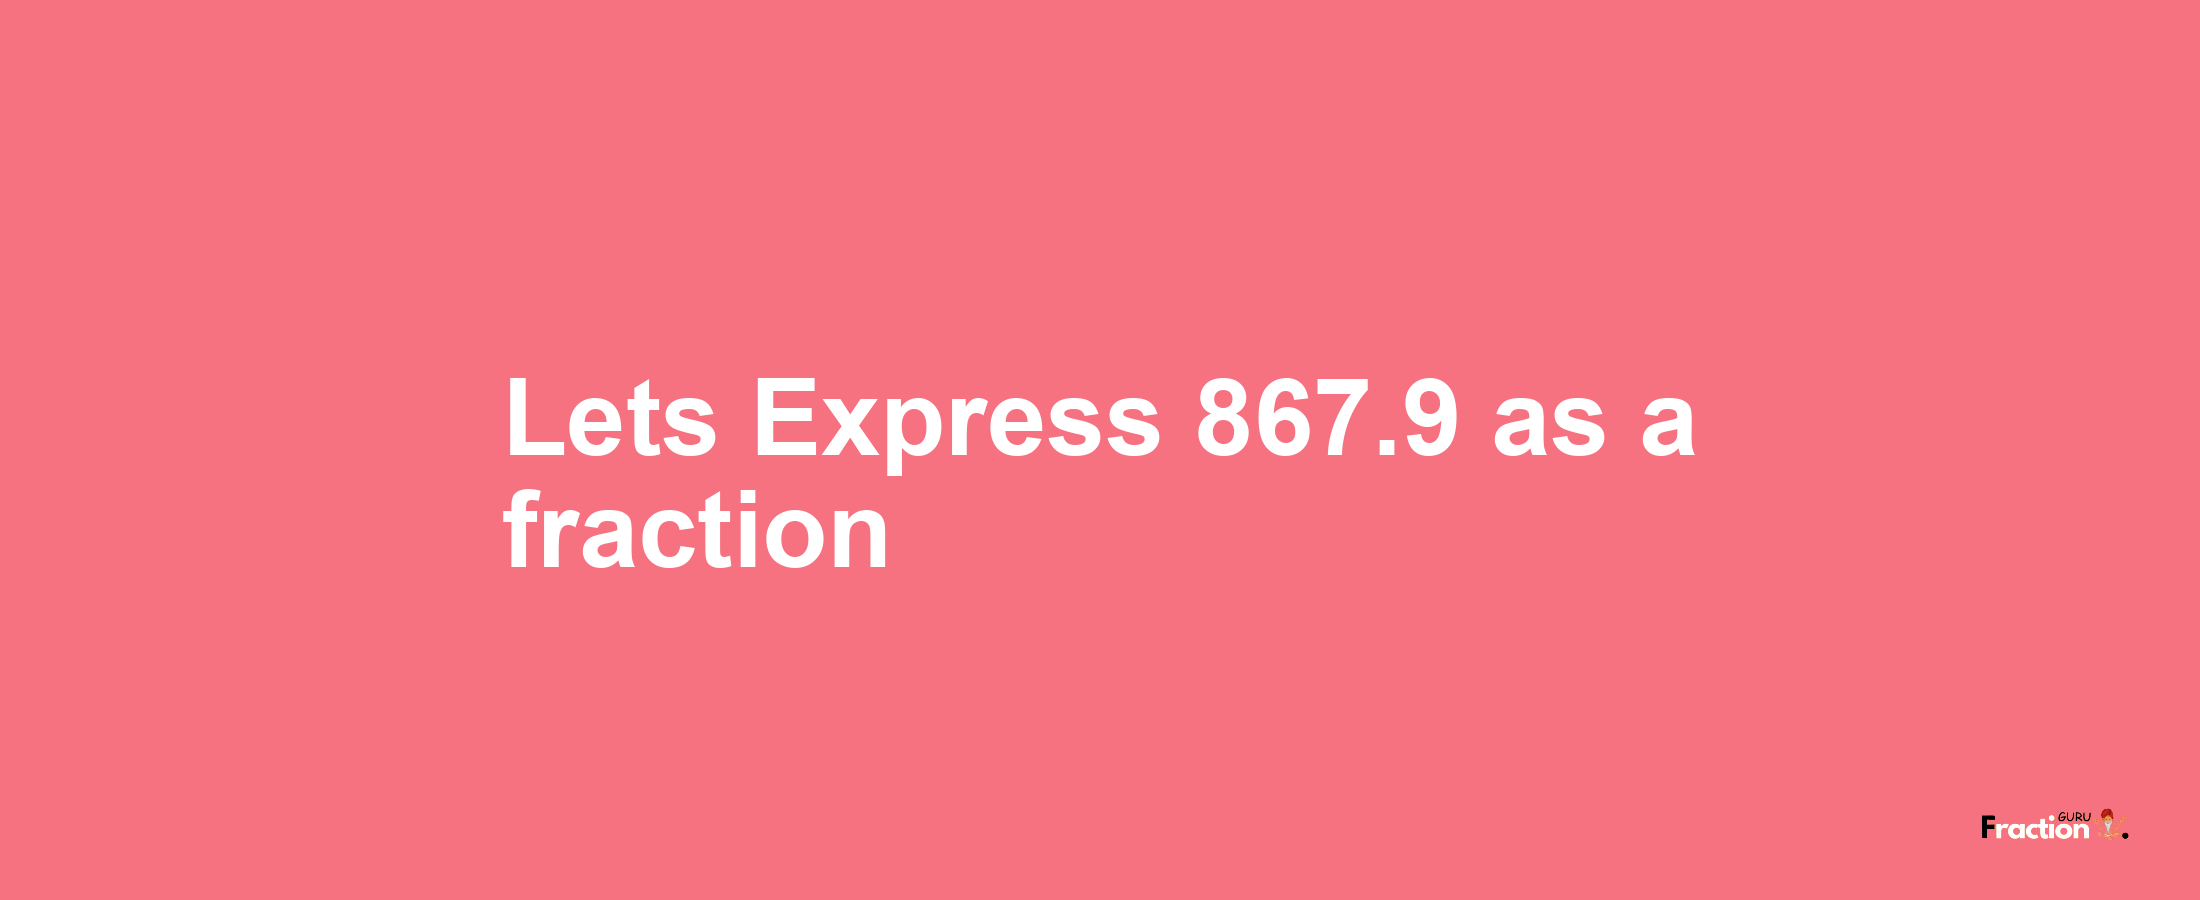 Lets Express 867.9 as afraction